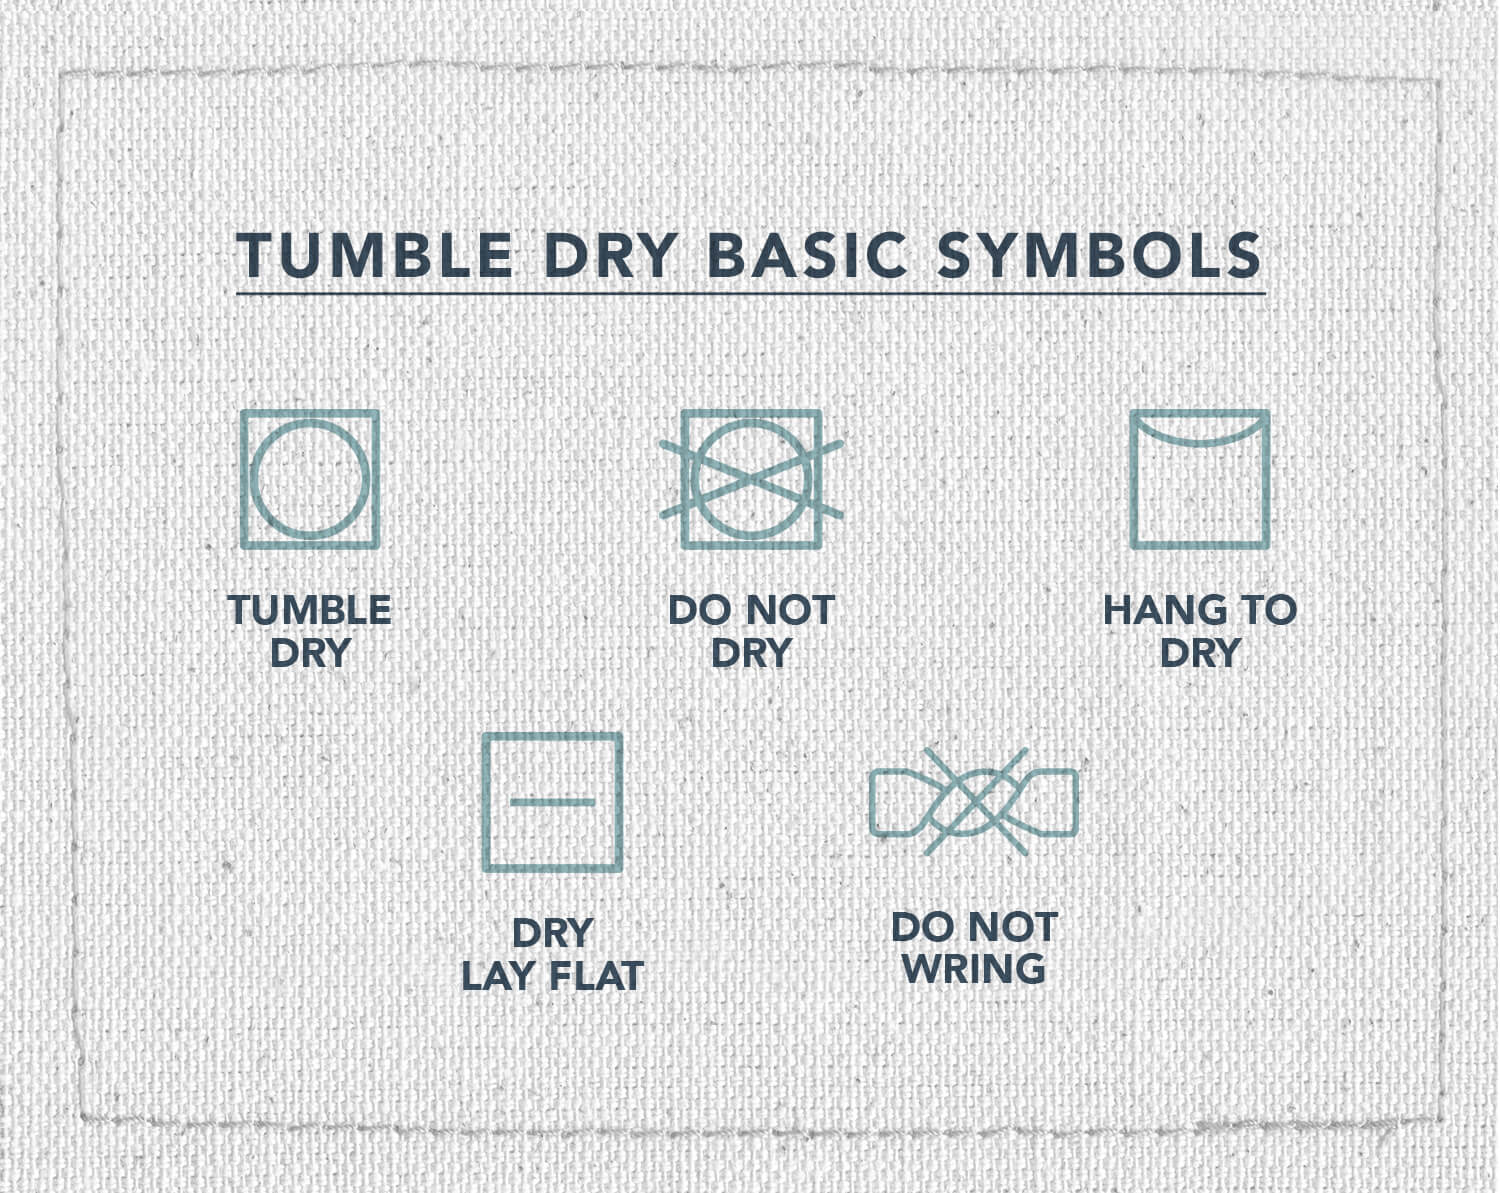 An infographic of five laundry care symbols, indicating what symbol means how to dry your clothes, tumble dry, do not dry, hang to dry, dry lay flat, or do not wring